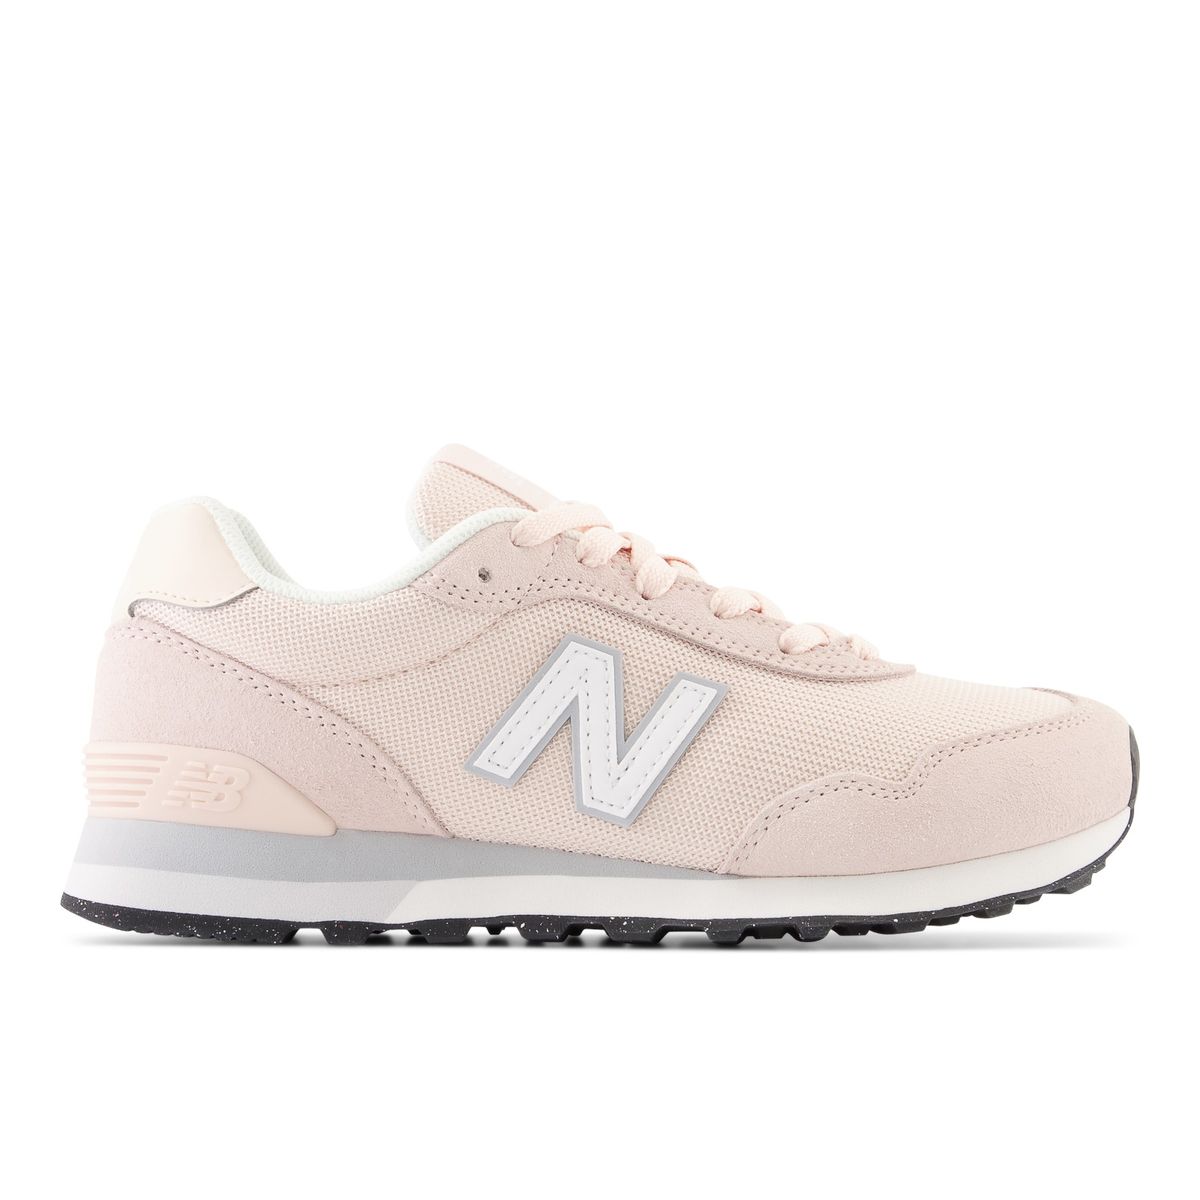 New Balance Women's 515 v3 Lifestyle Shoes - Pink | Shop Today. Get it ...